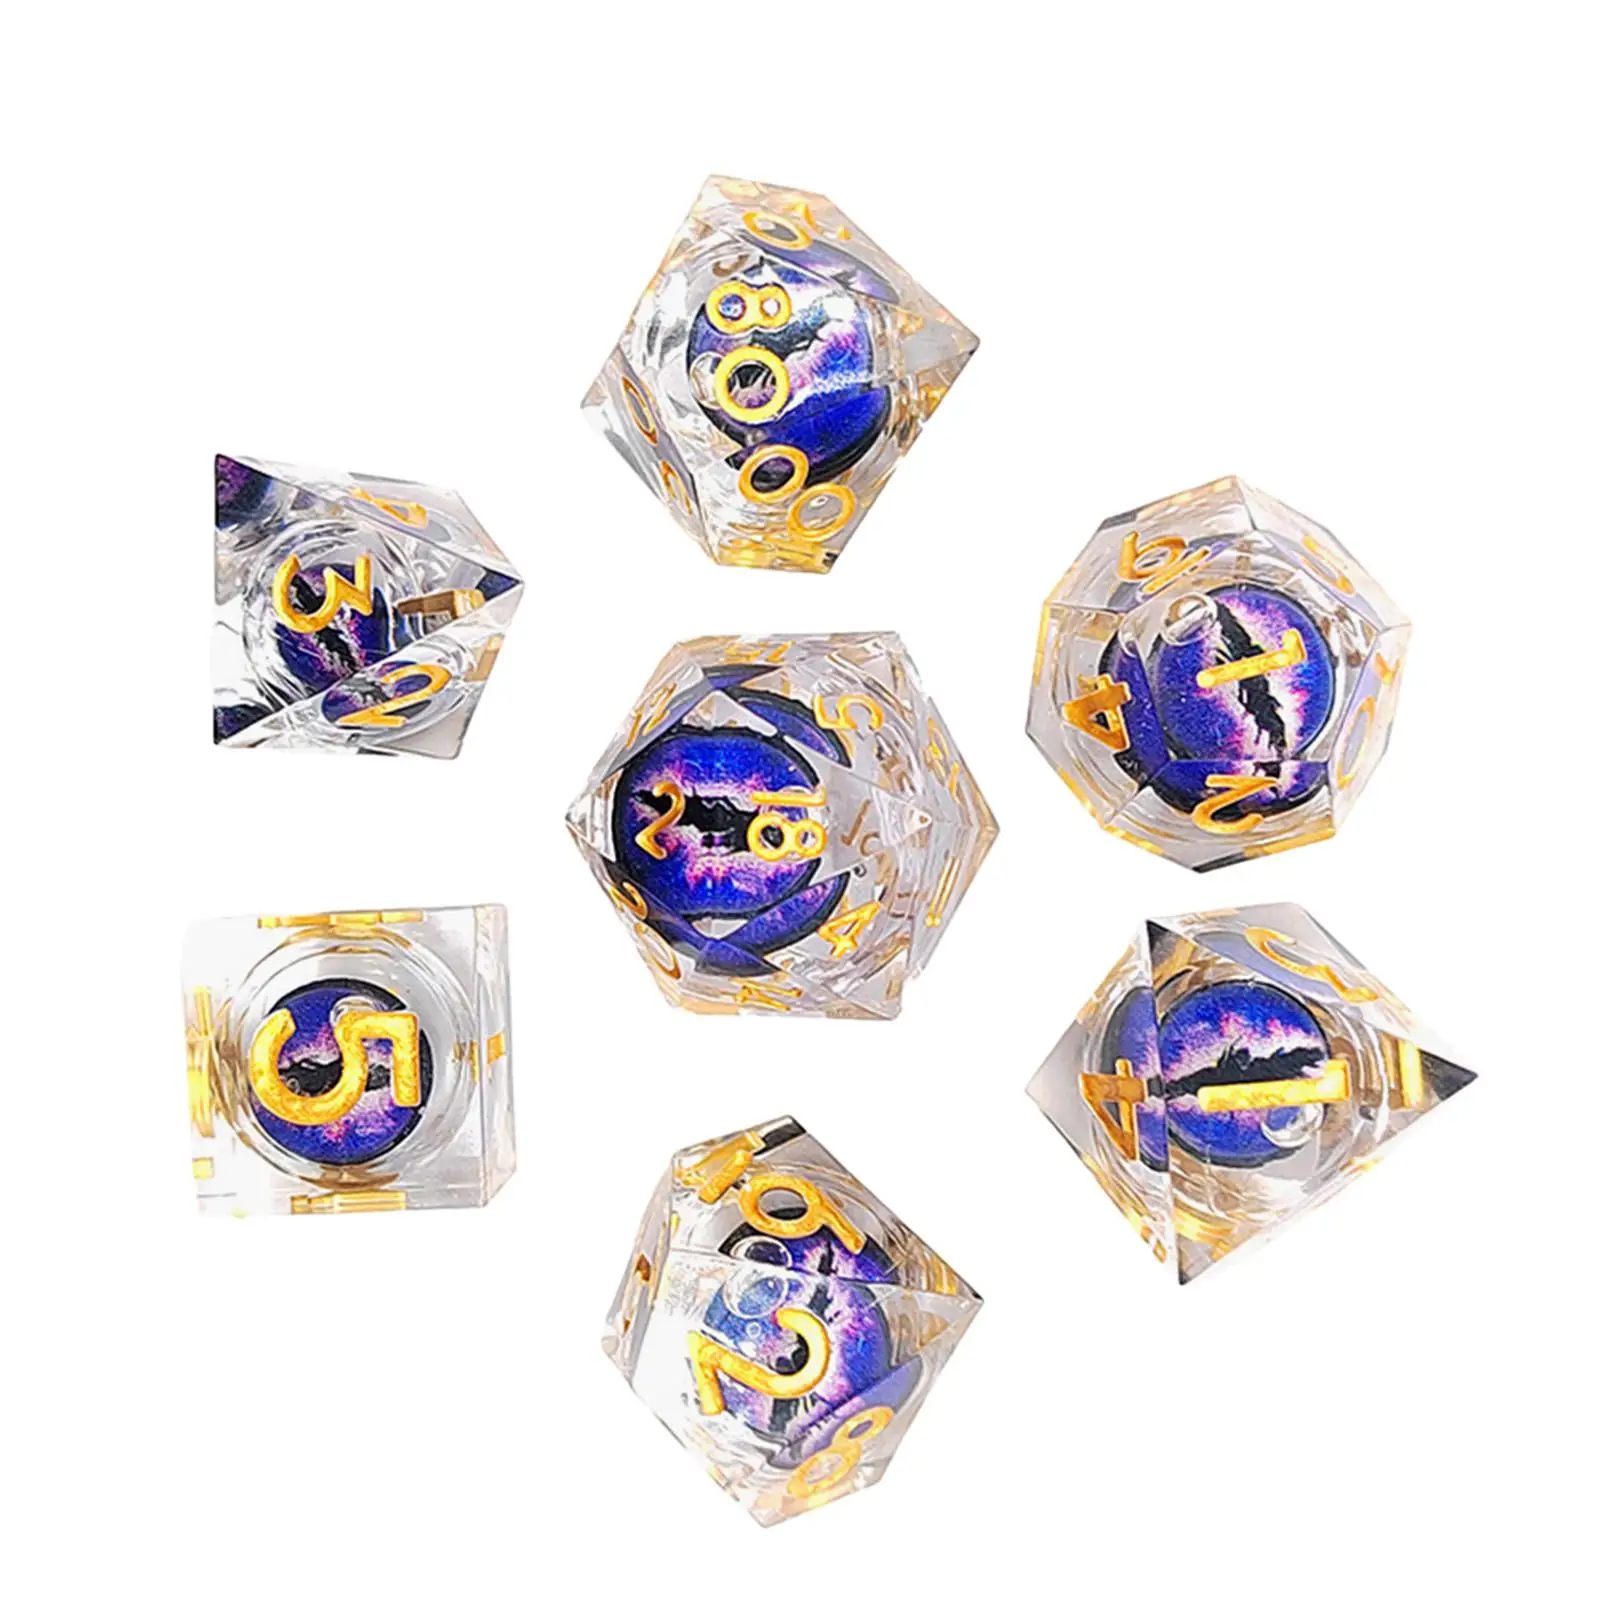 Polyhedral Eye Game Dice 7 Pieces Set Wear Resistant Versatile Smooth Surface Collection Accessories for Business Trip